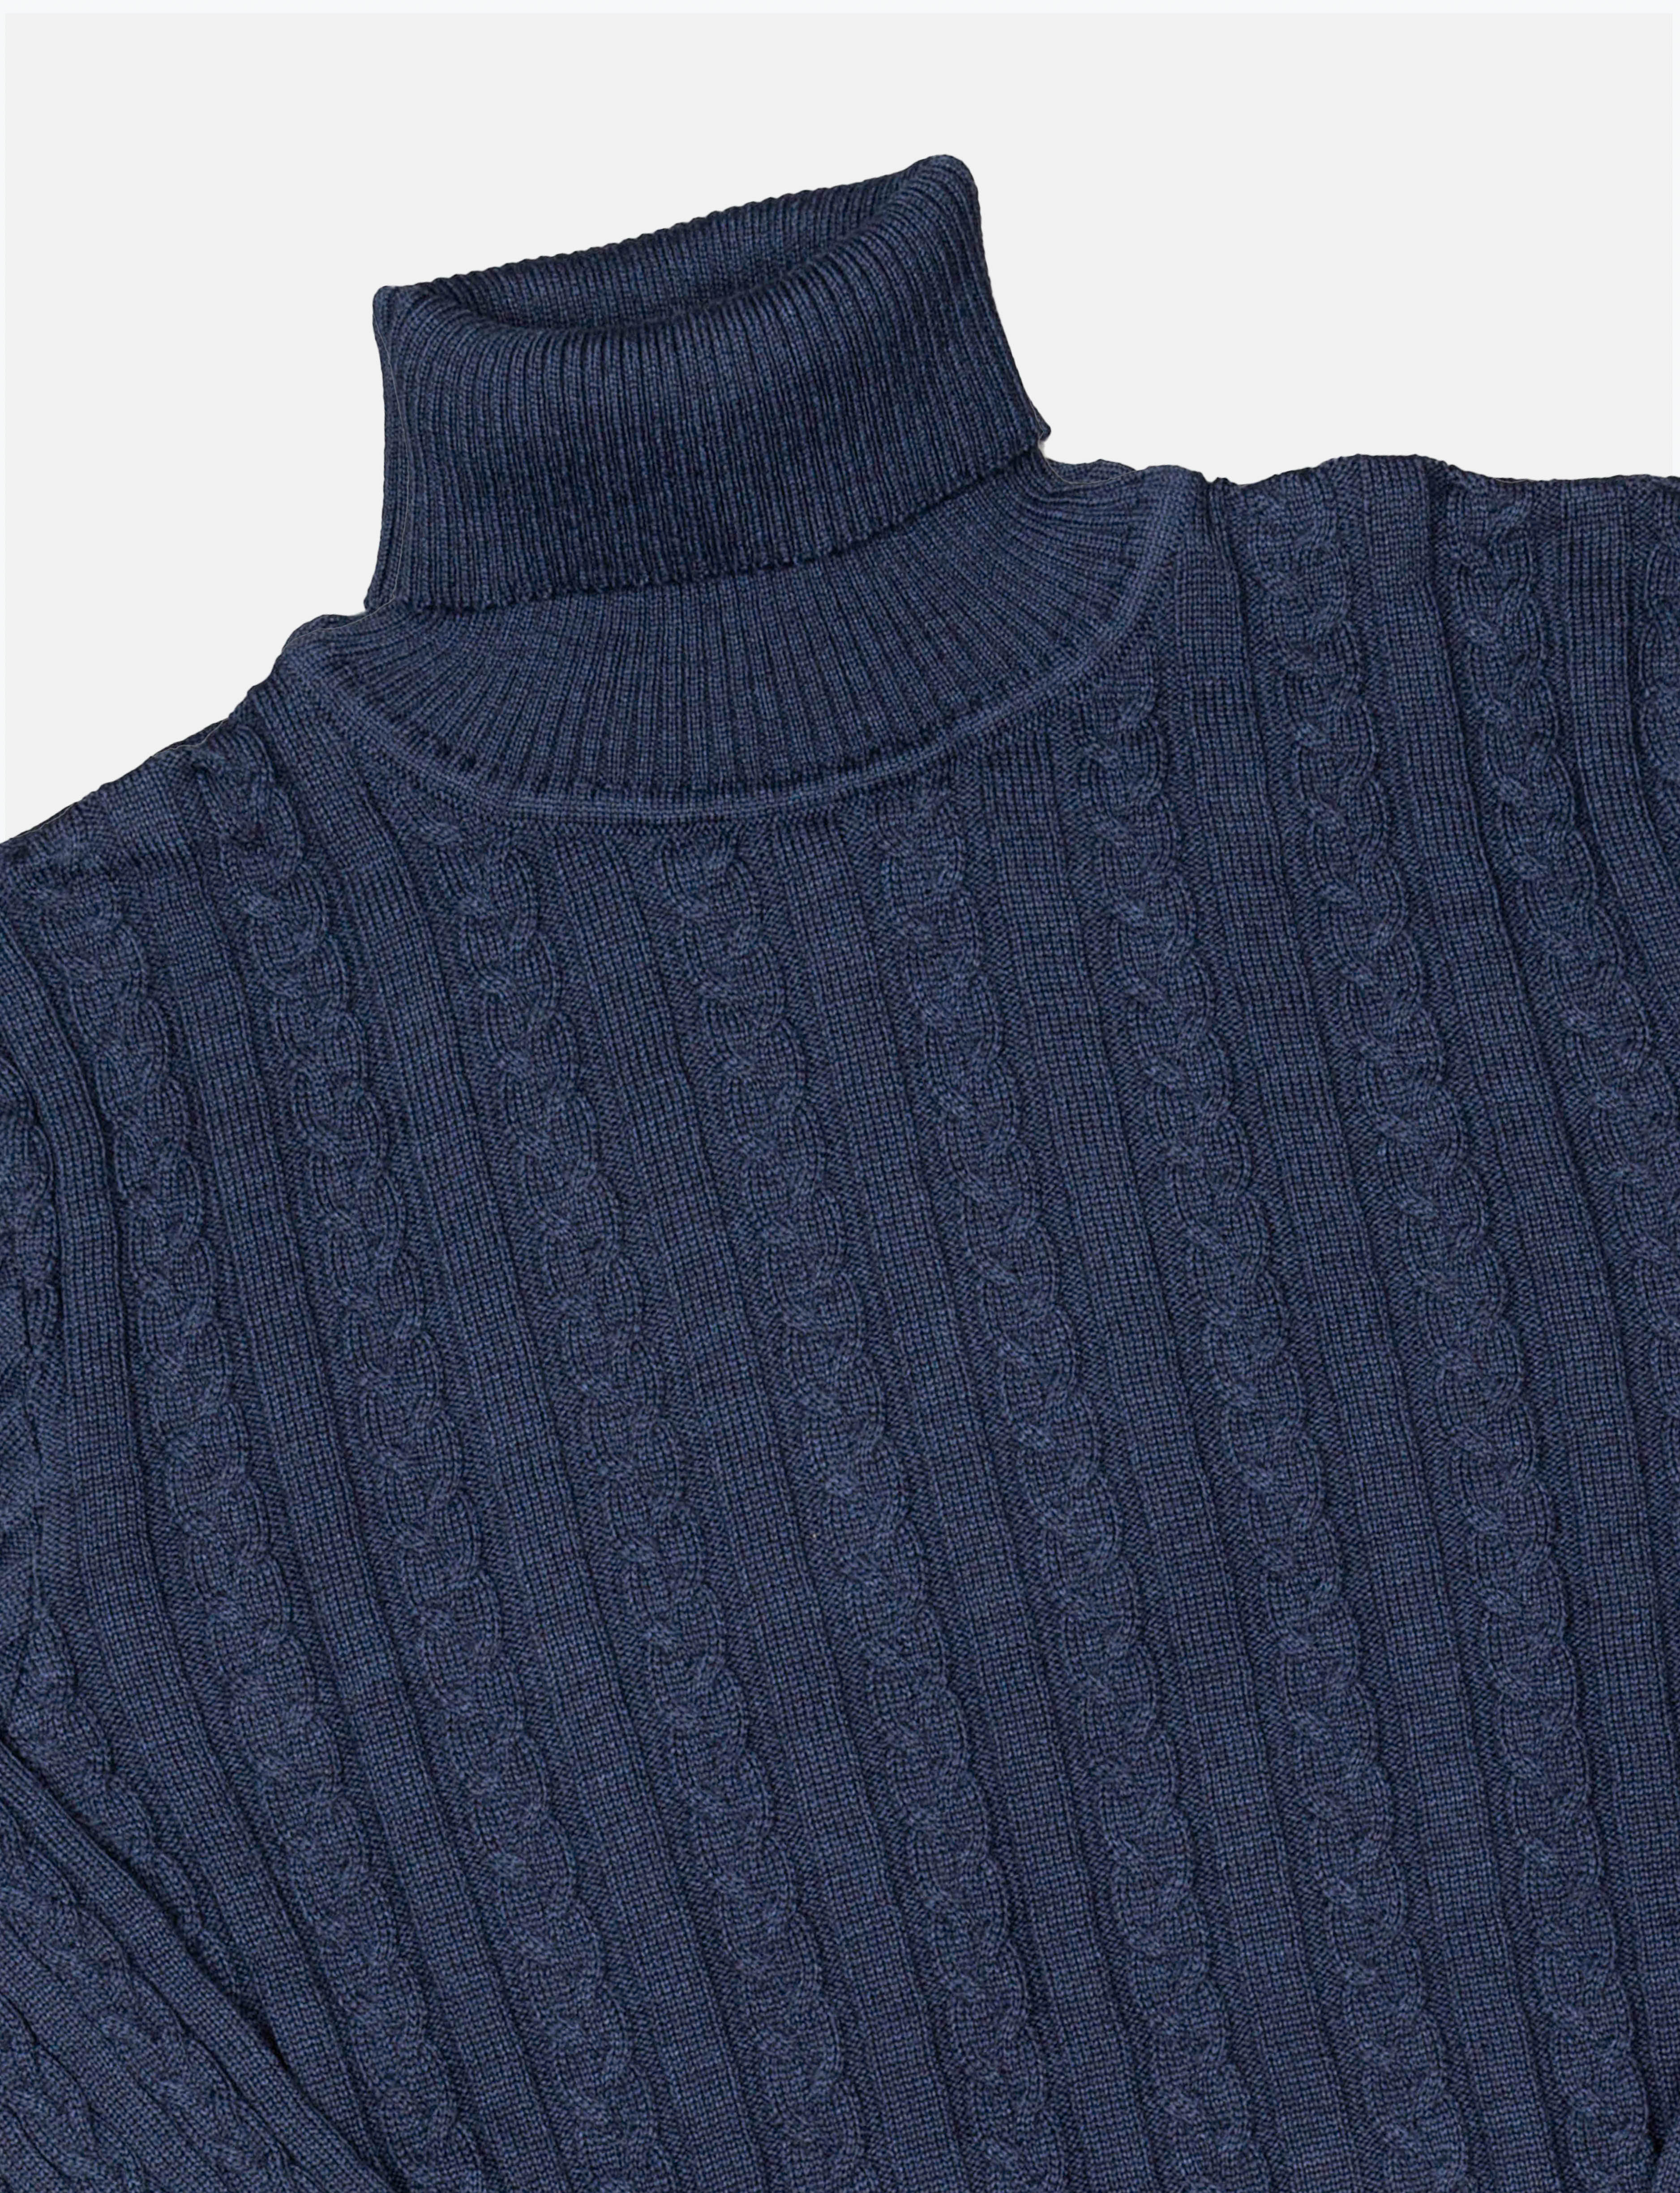 Navy Cable Roll Neck Knit